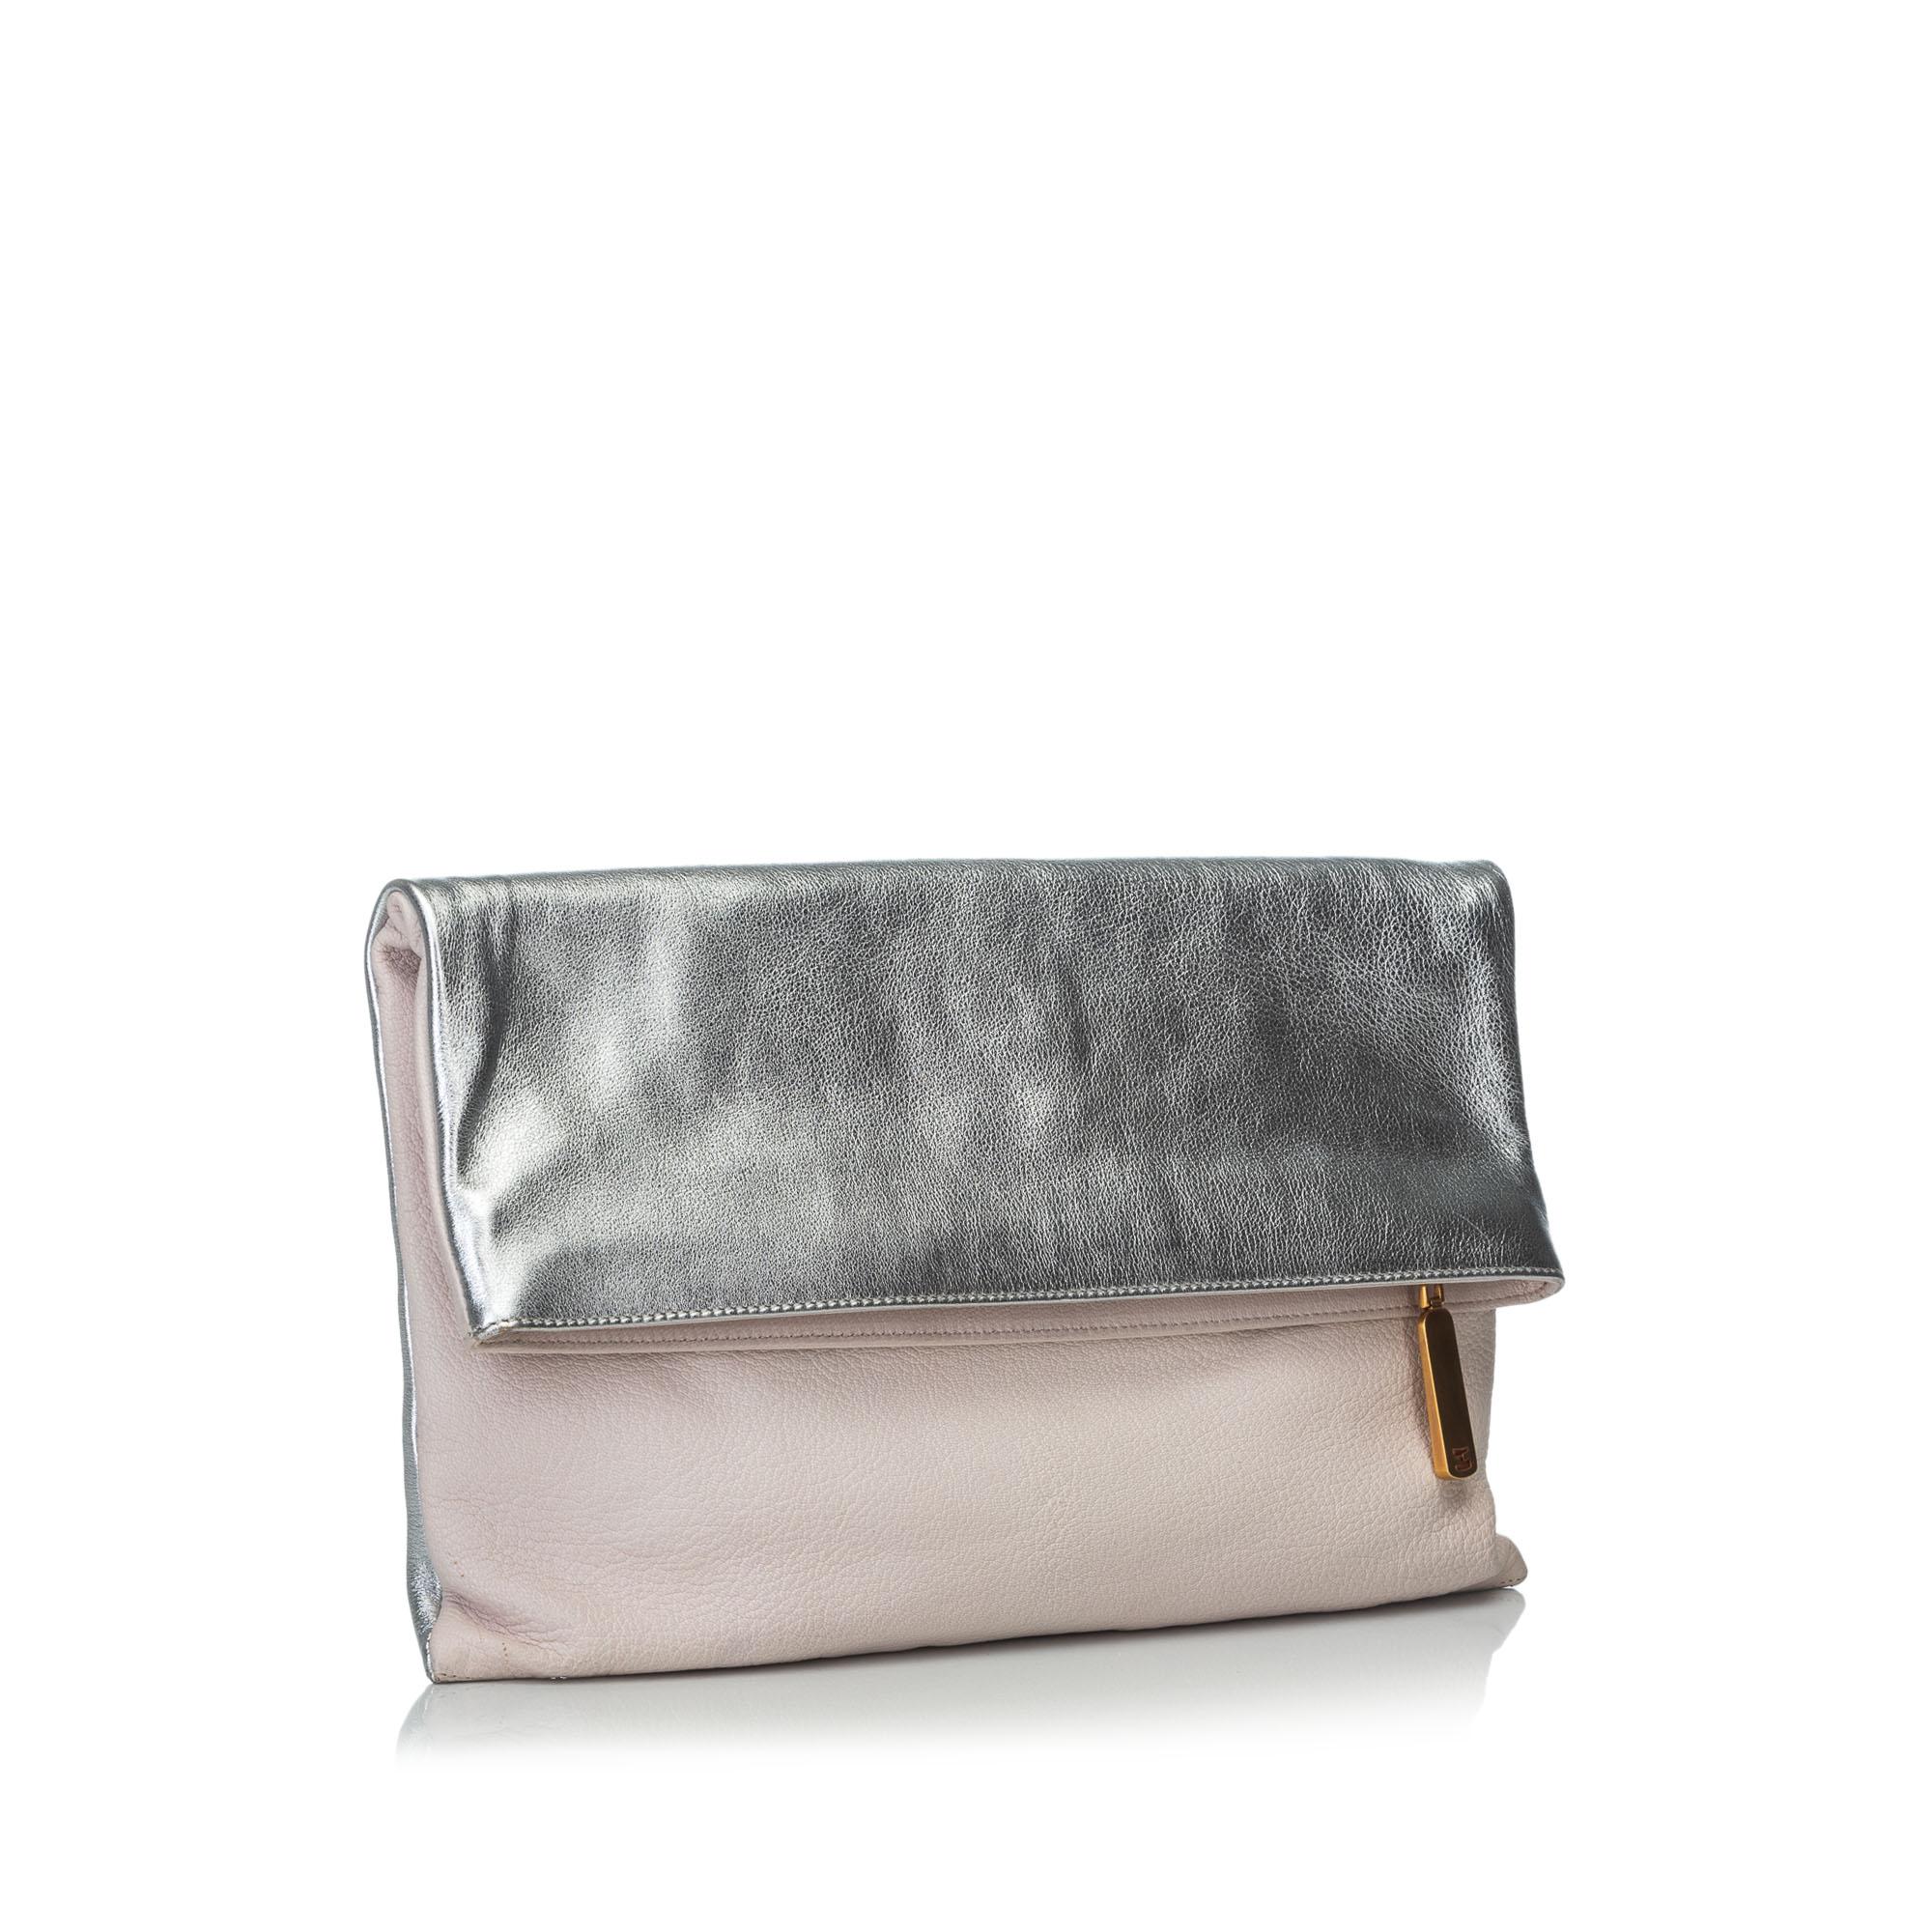 This clutch bag features a leather body, a front fold over flap, and a top zip closure, It carries as AB condition rating.

Inclusions: 
Dust Bag

Dimensions:
Length: 34.00 cm
Width: 21.00 cm
Depth: 1.00 cm

Material: Leather x Others
Country of